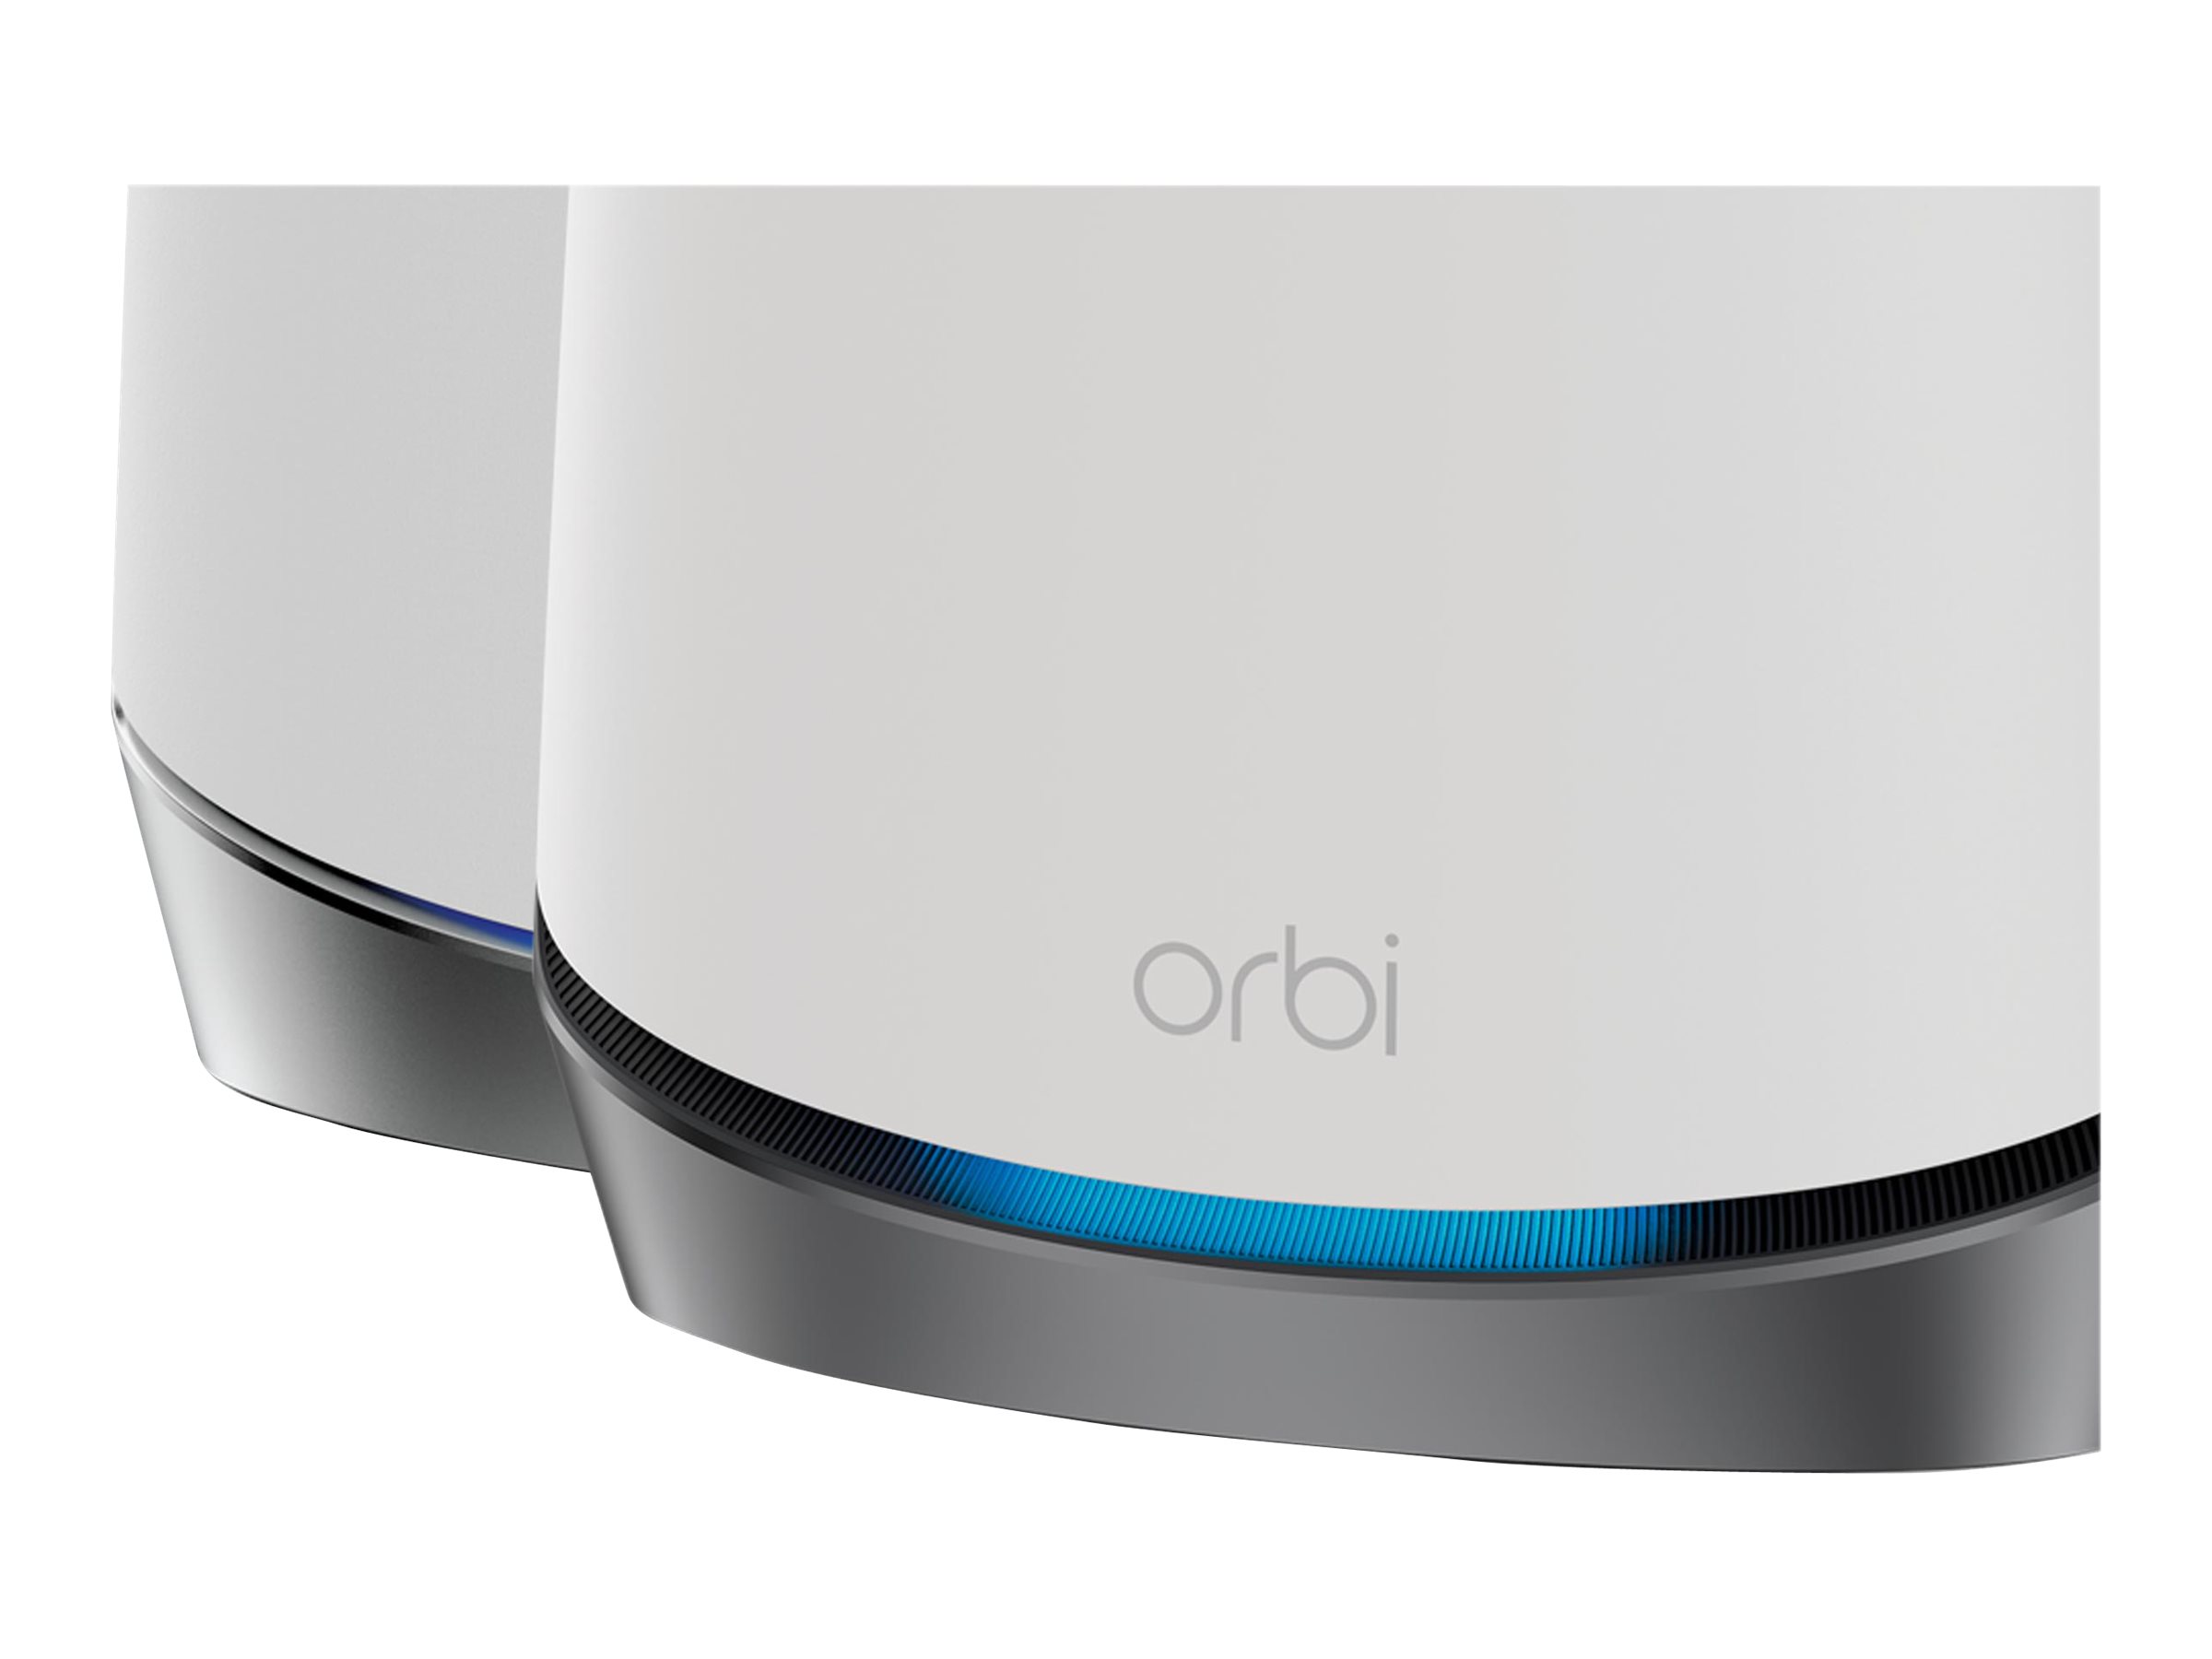 NETGEAR Orbi 5G Tri-Band WiFi 6 Mesh System (NBK752) – Router with 1 Satellite Extender | Coverage up to 5,000 sq. ft, 40 Devices | AX4200 (Up to 4.2Gbps) NBK752-100NAS UPC  - NBK752-100NAS